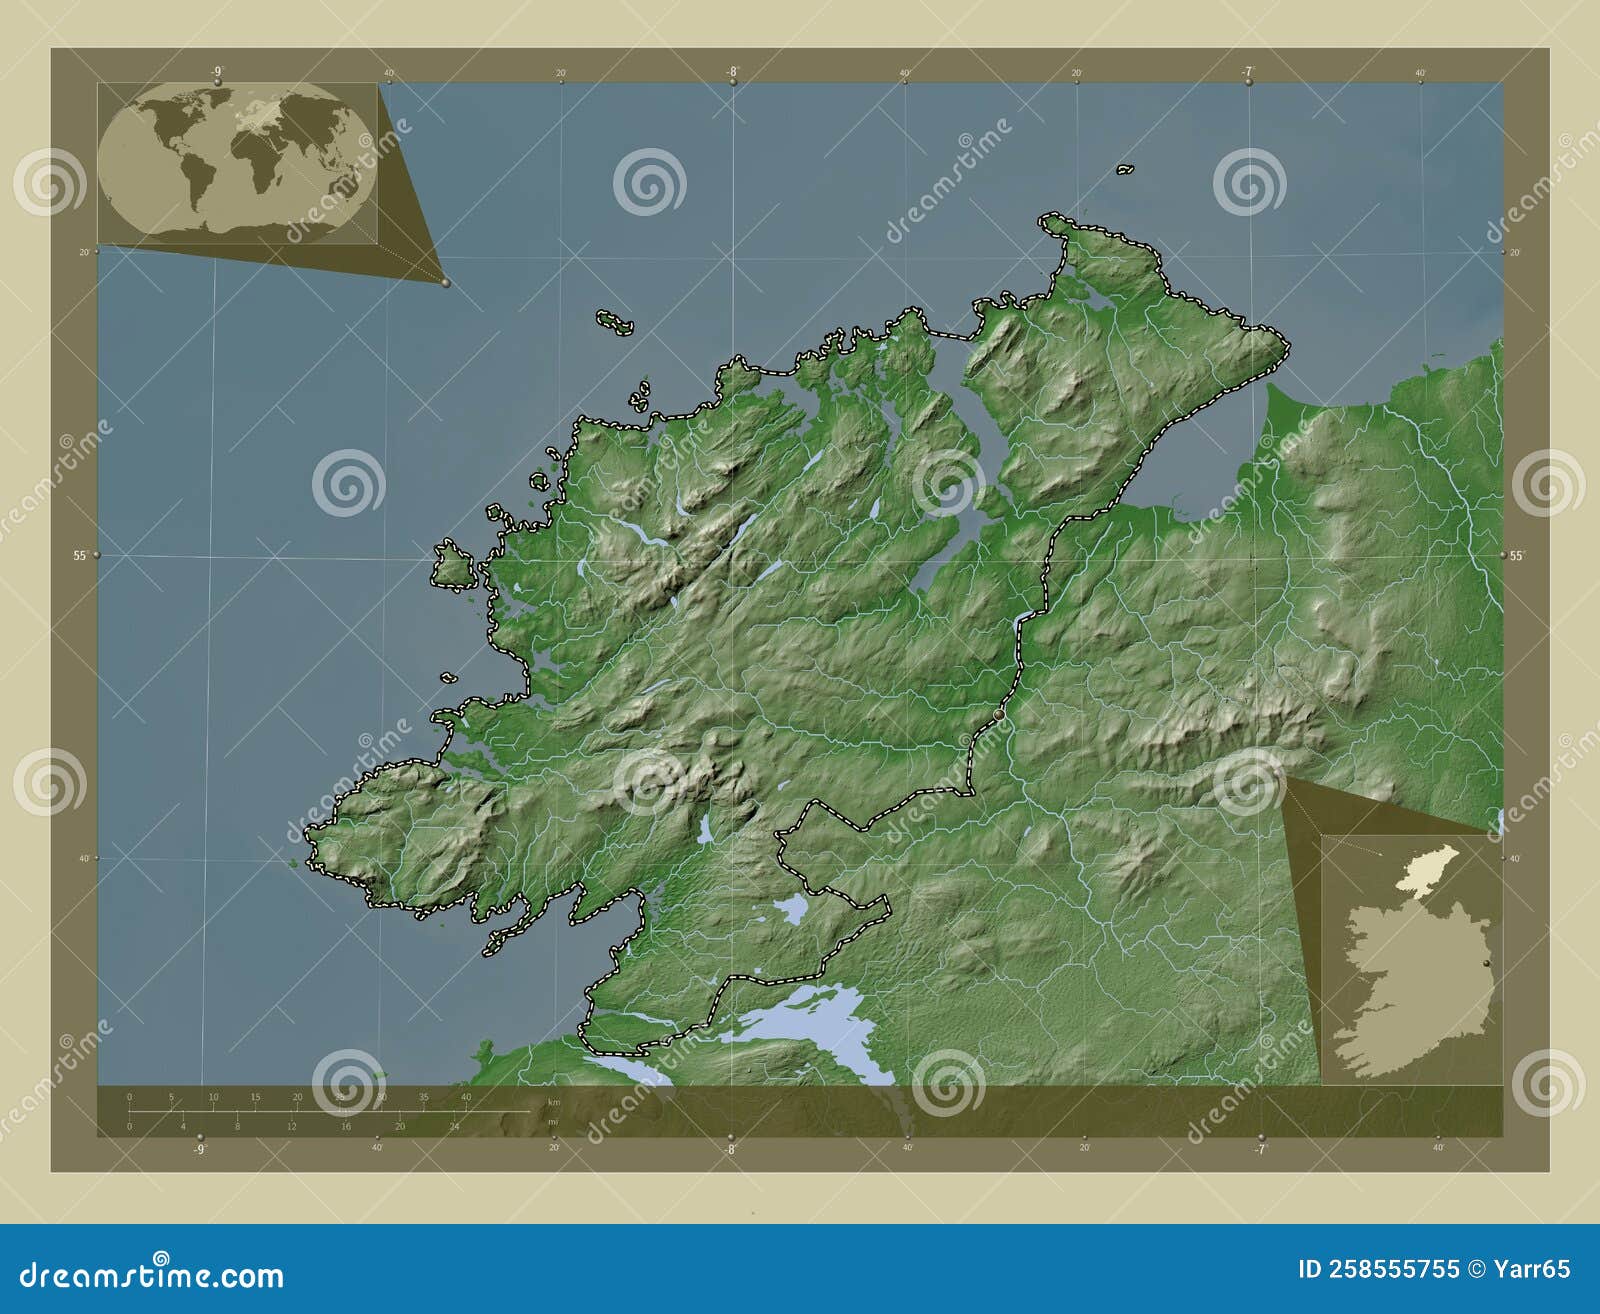 Donegal County Ireland Elevation Map Colored Wiki Style Lakes Rivers Corner Auxiliary Location Maps Donegal Ireland 258555755 